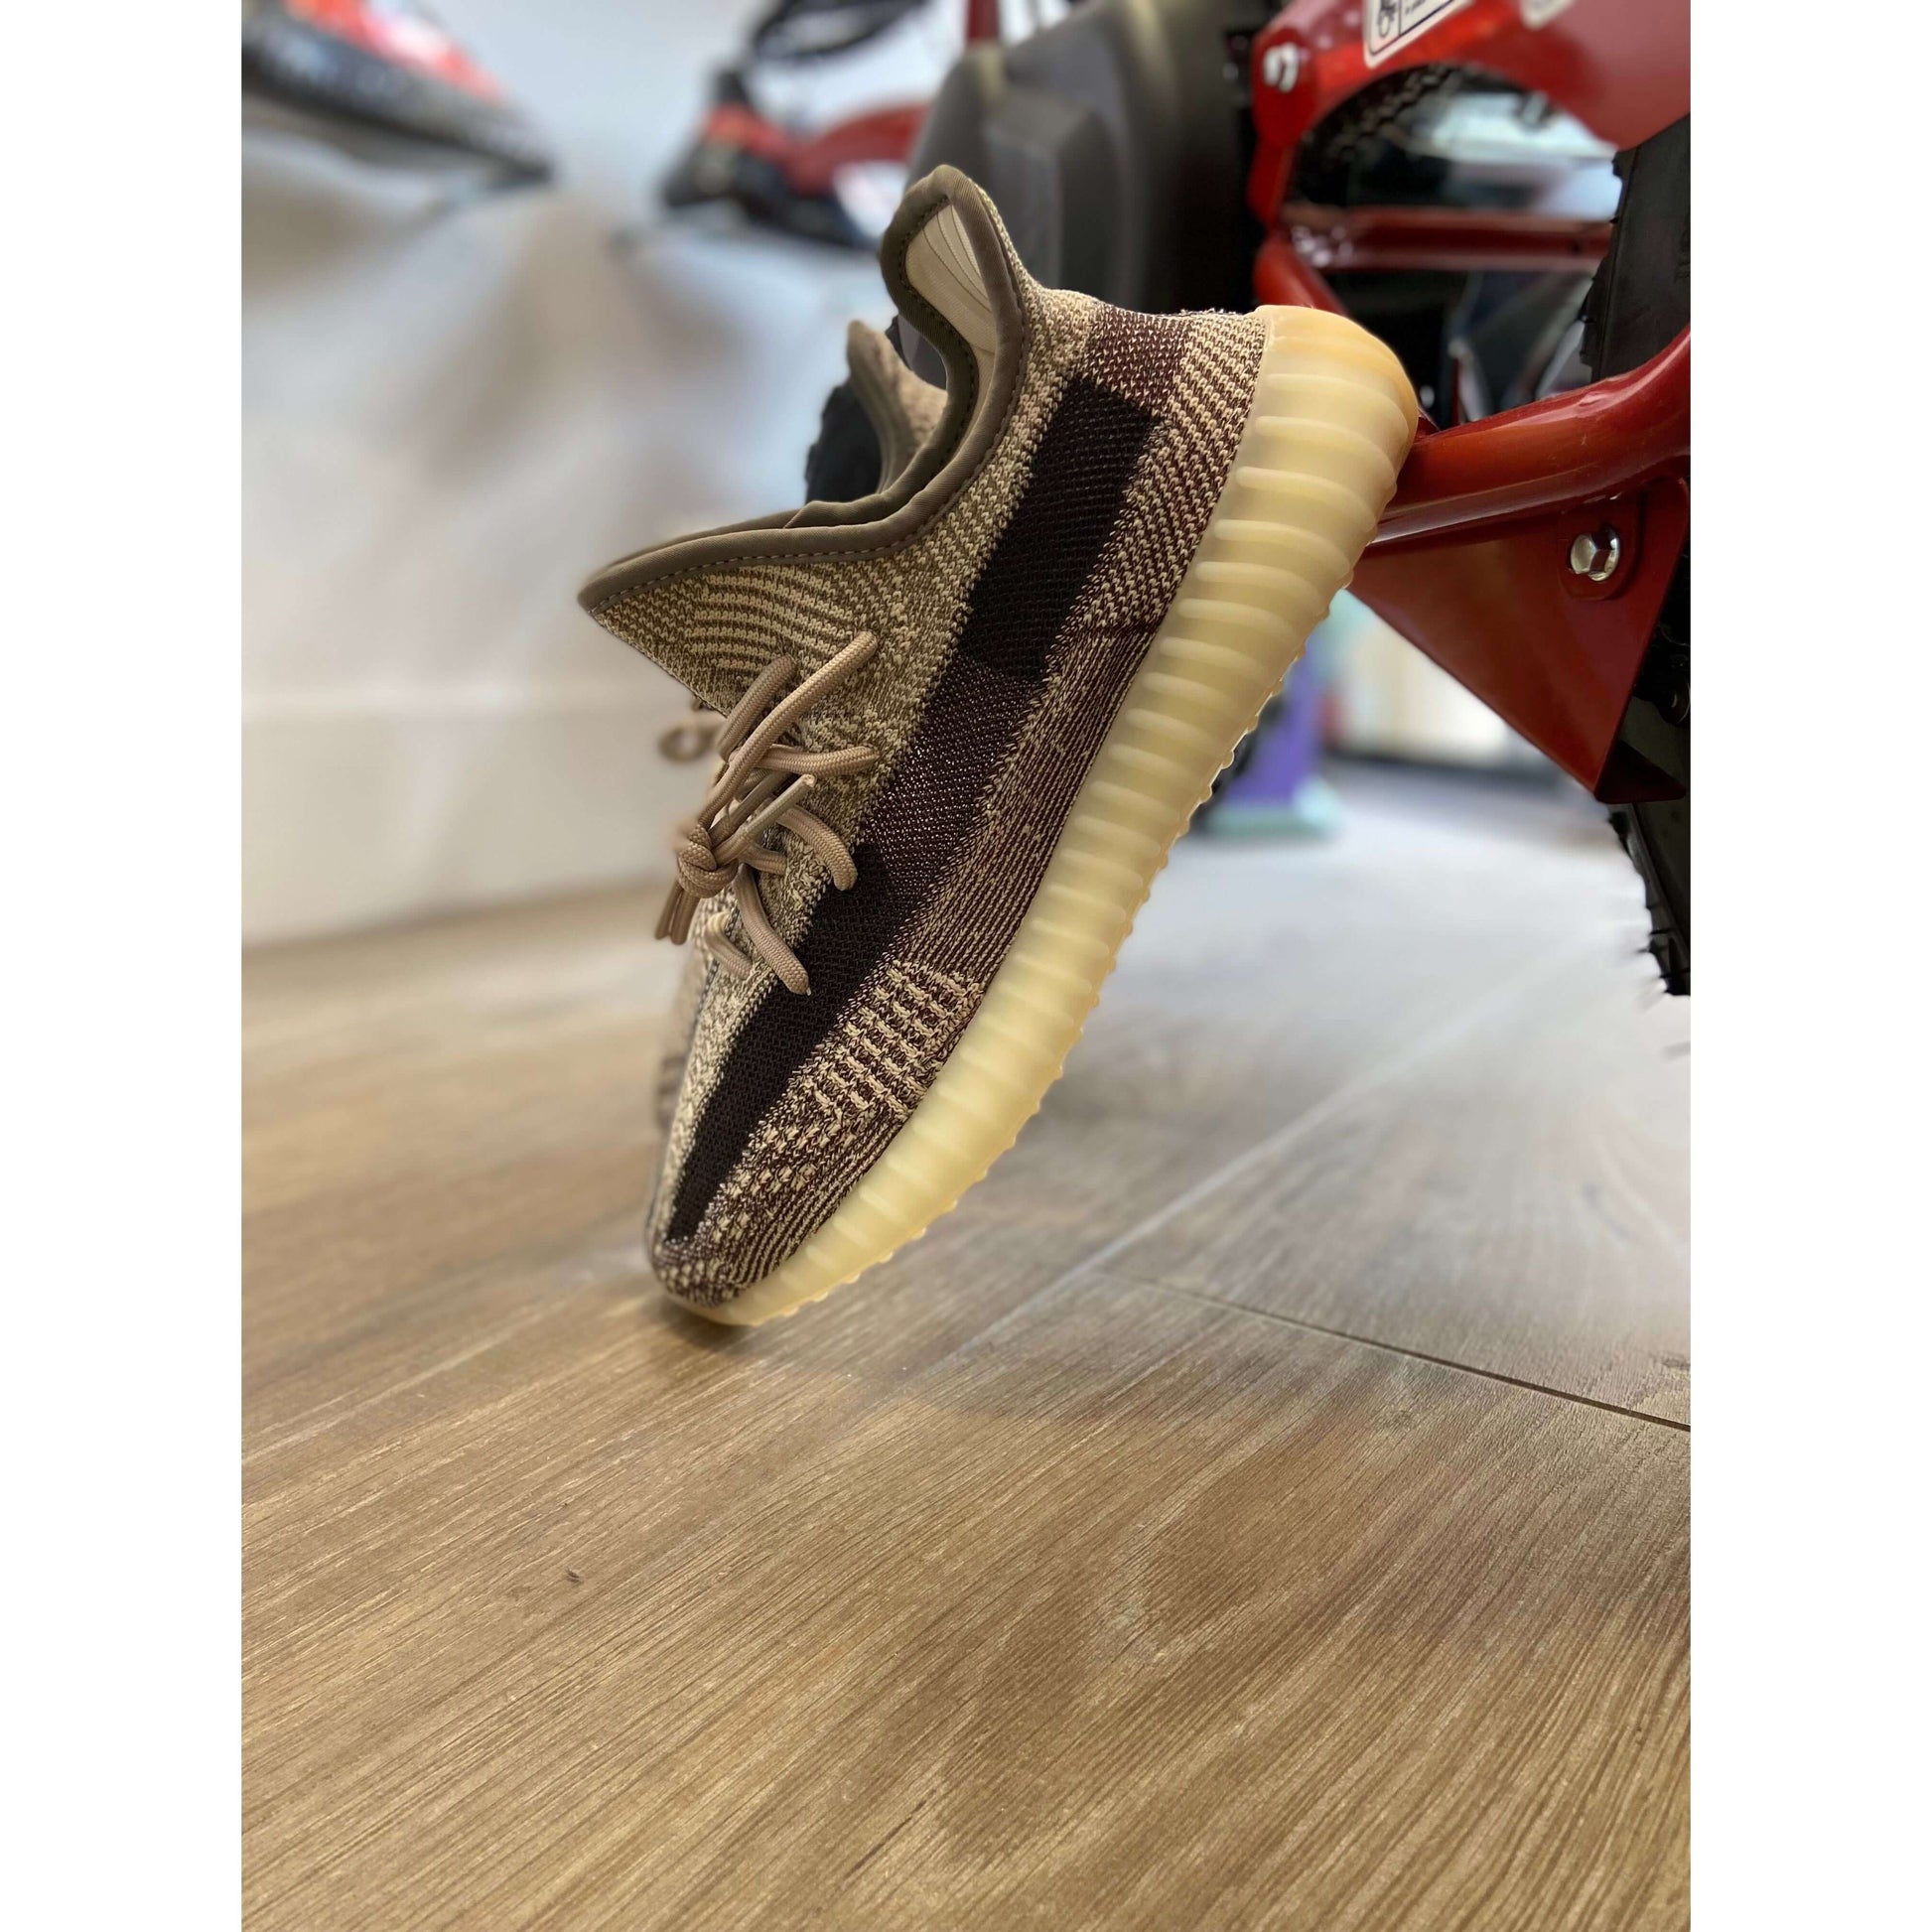 Adidas Yeezy Boost 350 V2 Zyon from Yeezy